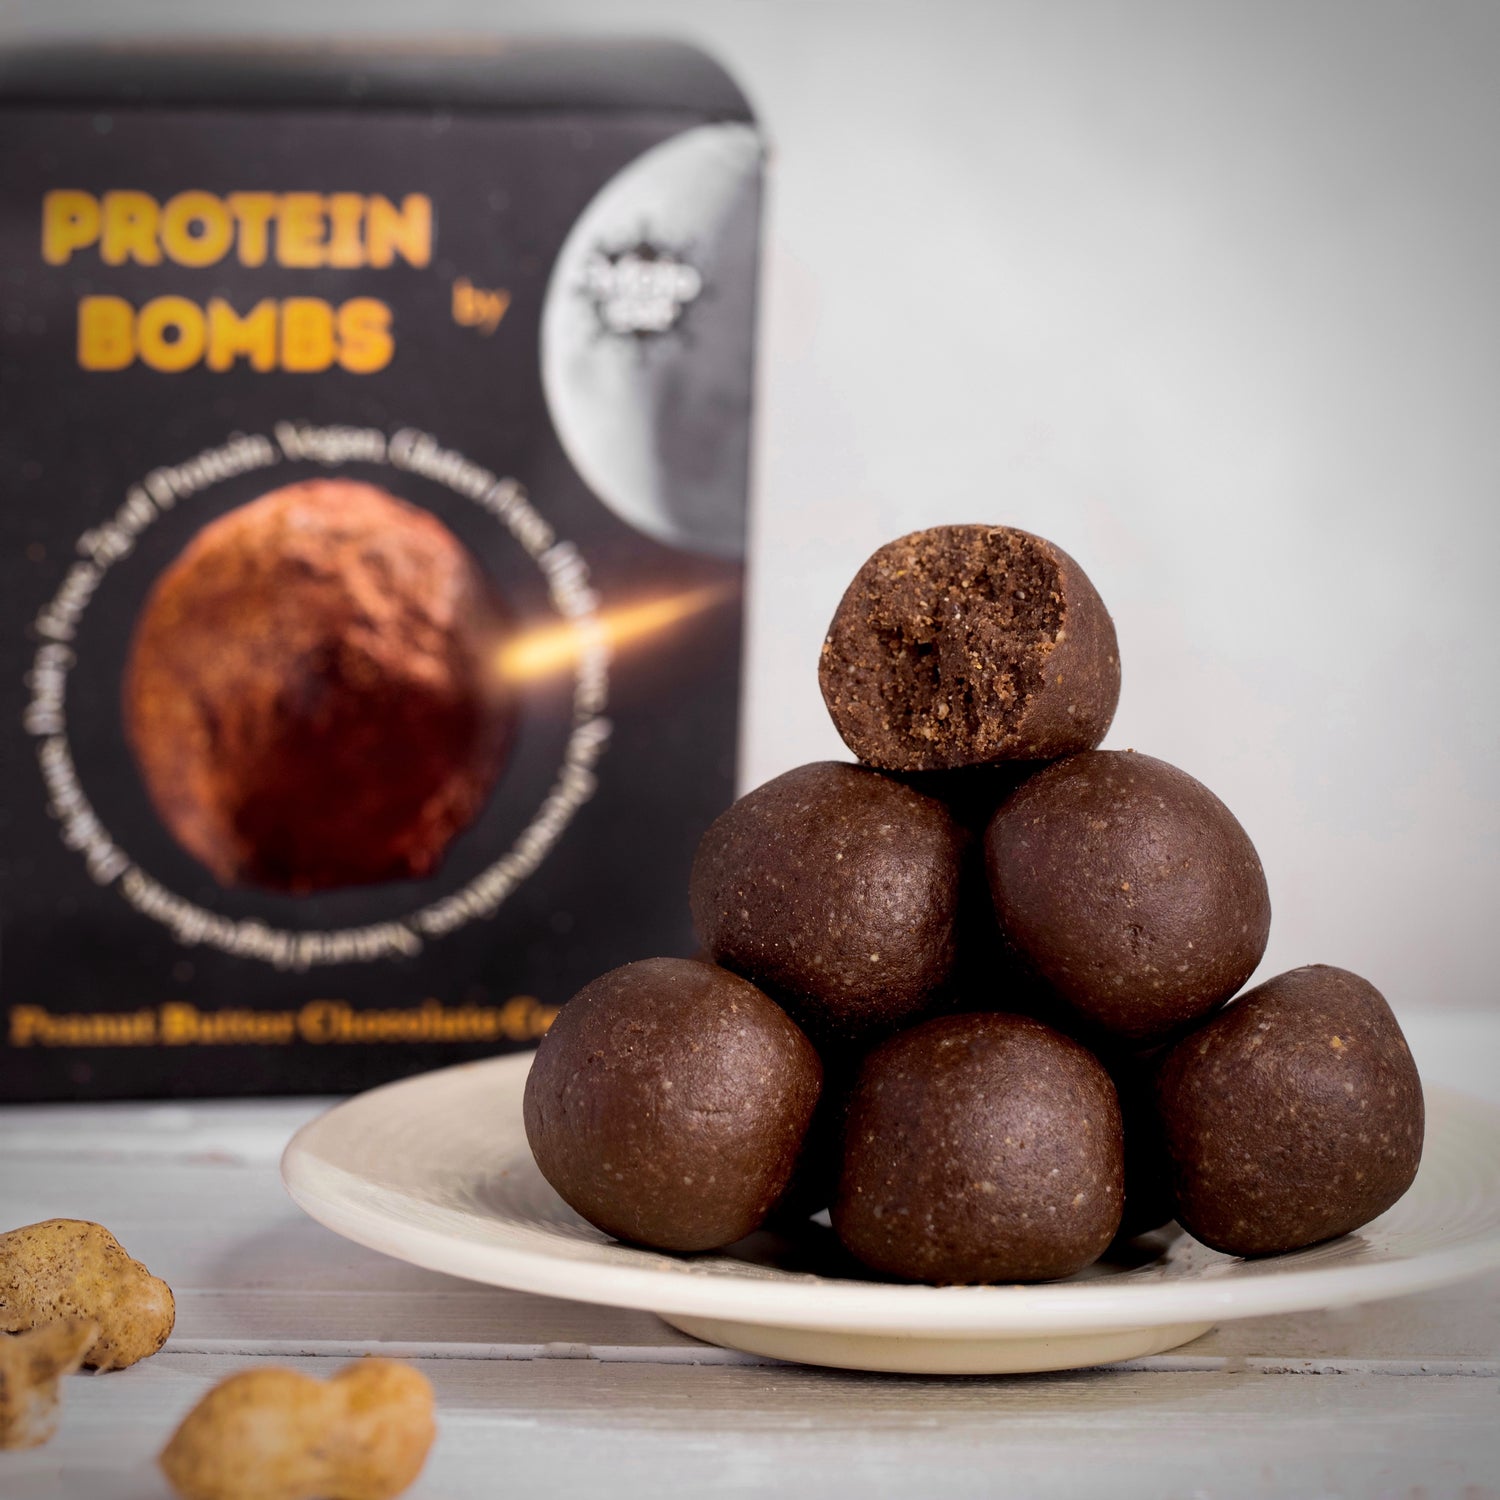 Protein Bombs